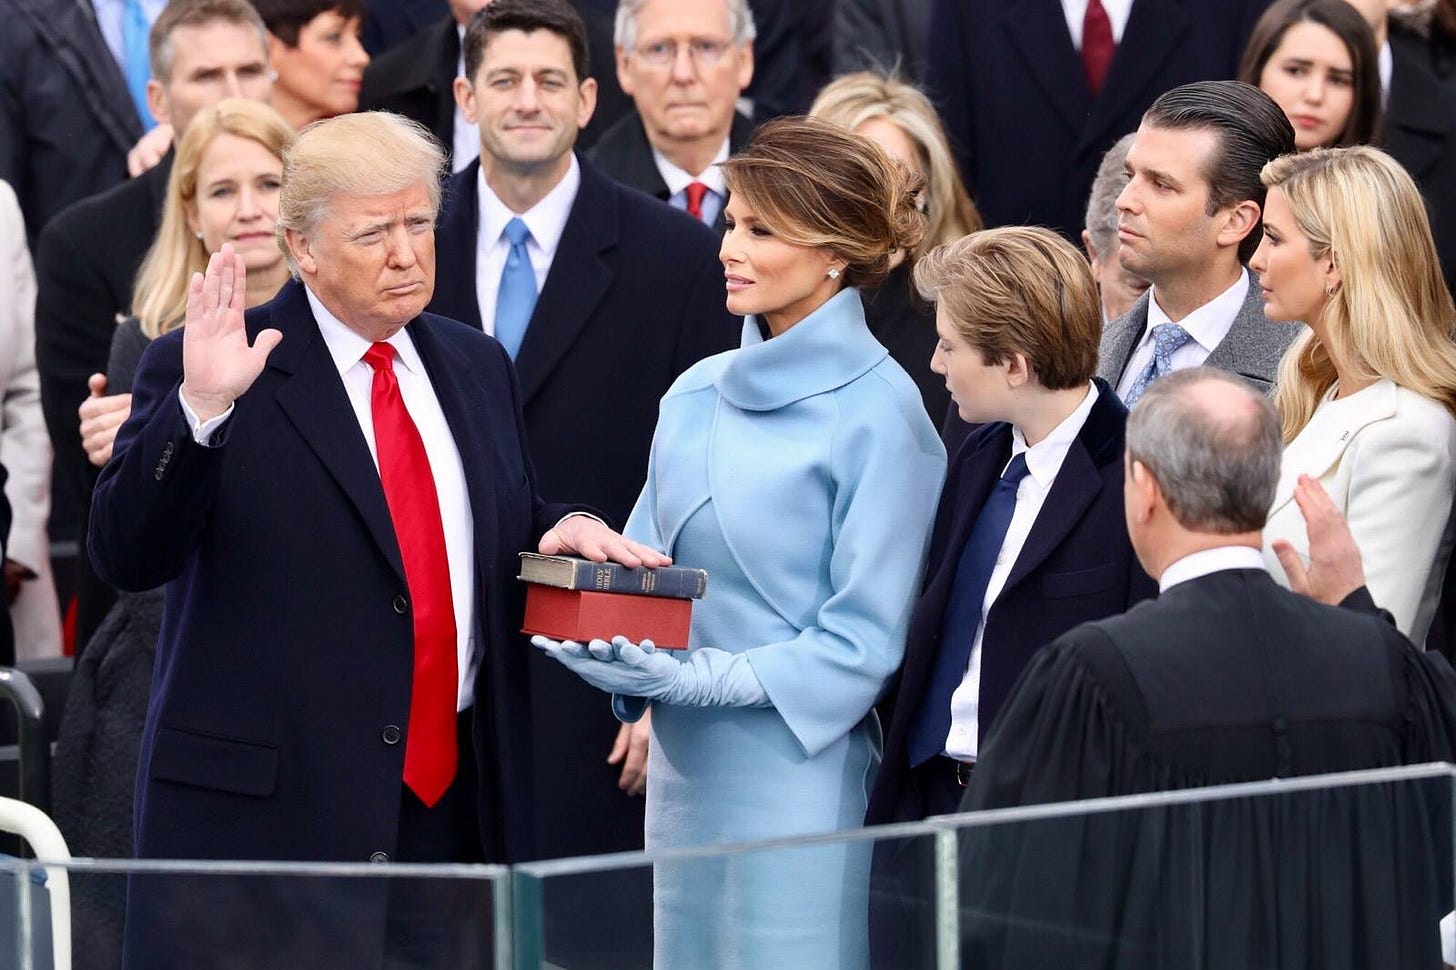 Donald J. Trump sworn-in as 45th President of the United States ...